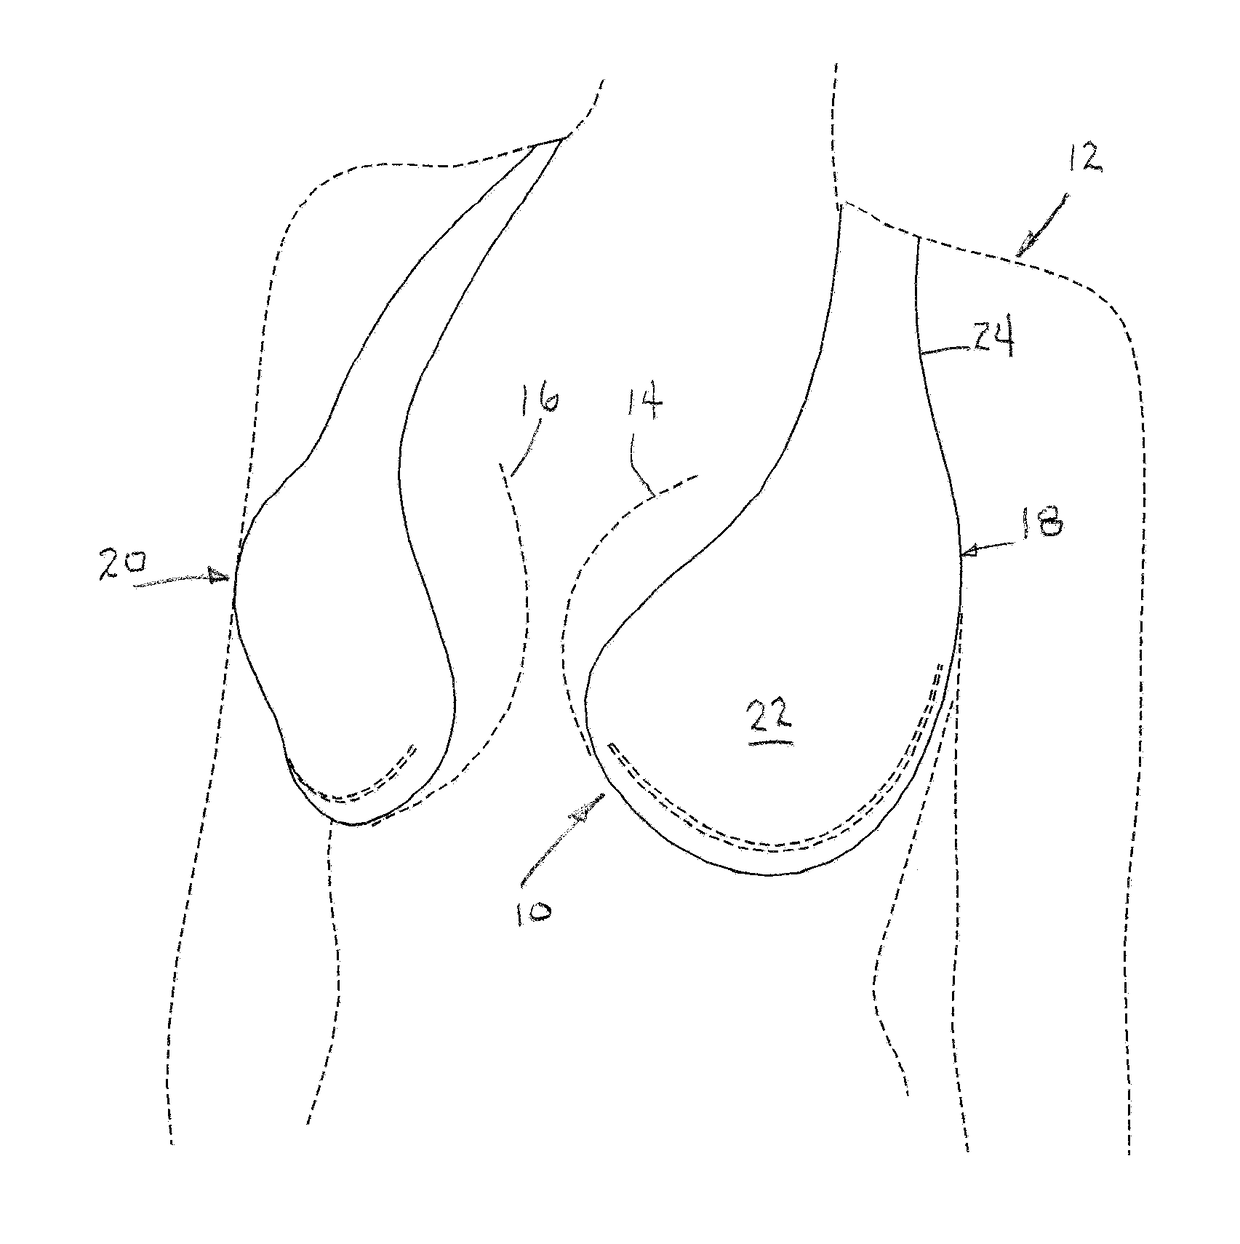 Adhesive Bra Construction Including Vertical Support Strap